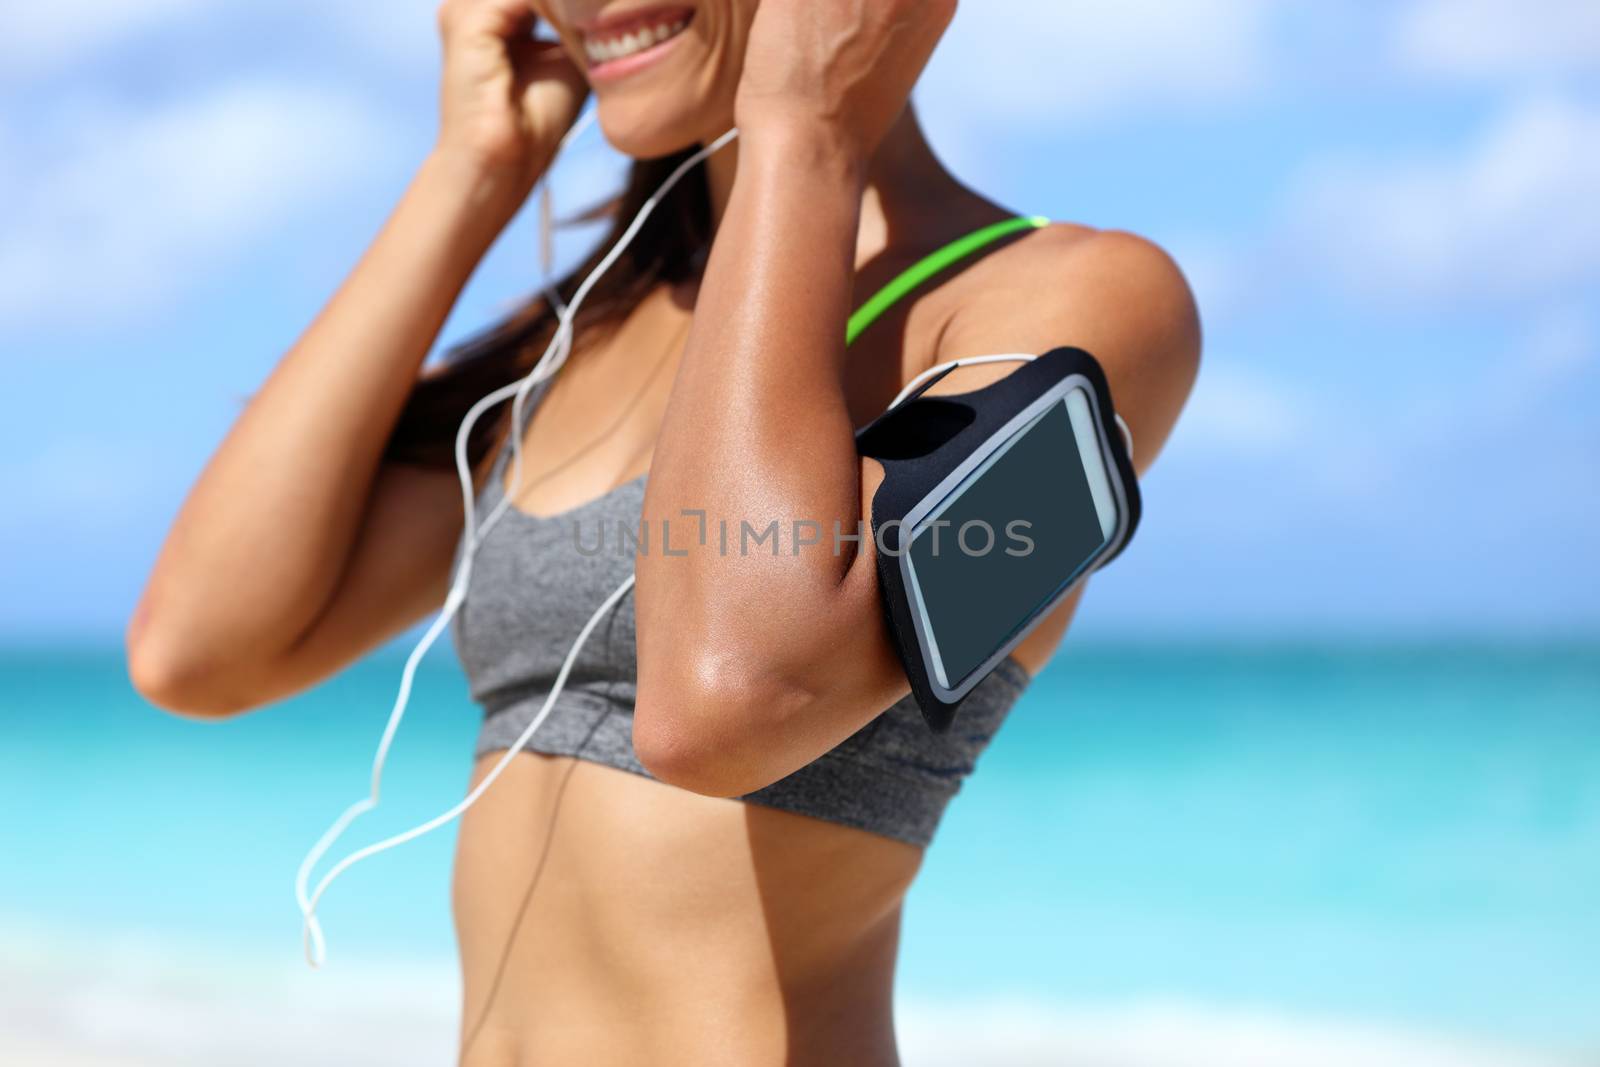 Fitness phone armband runner woman putting earphones. Closeup of sports smartphone case holder touchscreen strap on female arm of person wearing headset for running exercise cardio workout on beach.